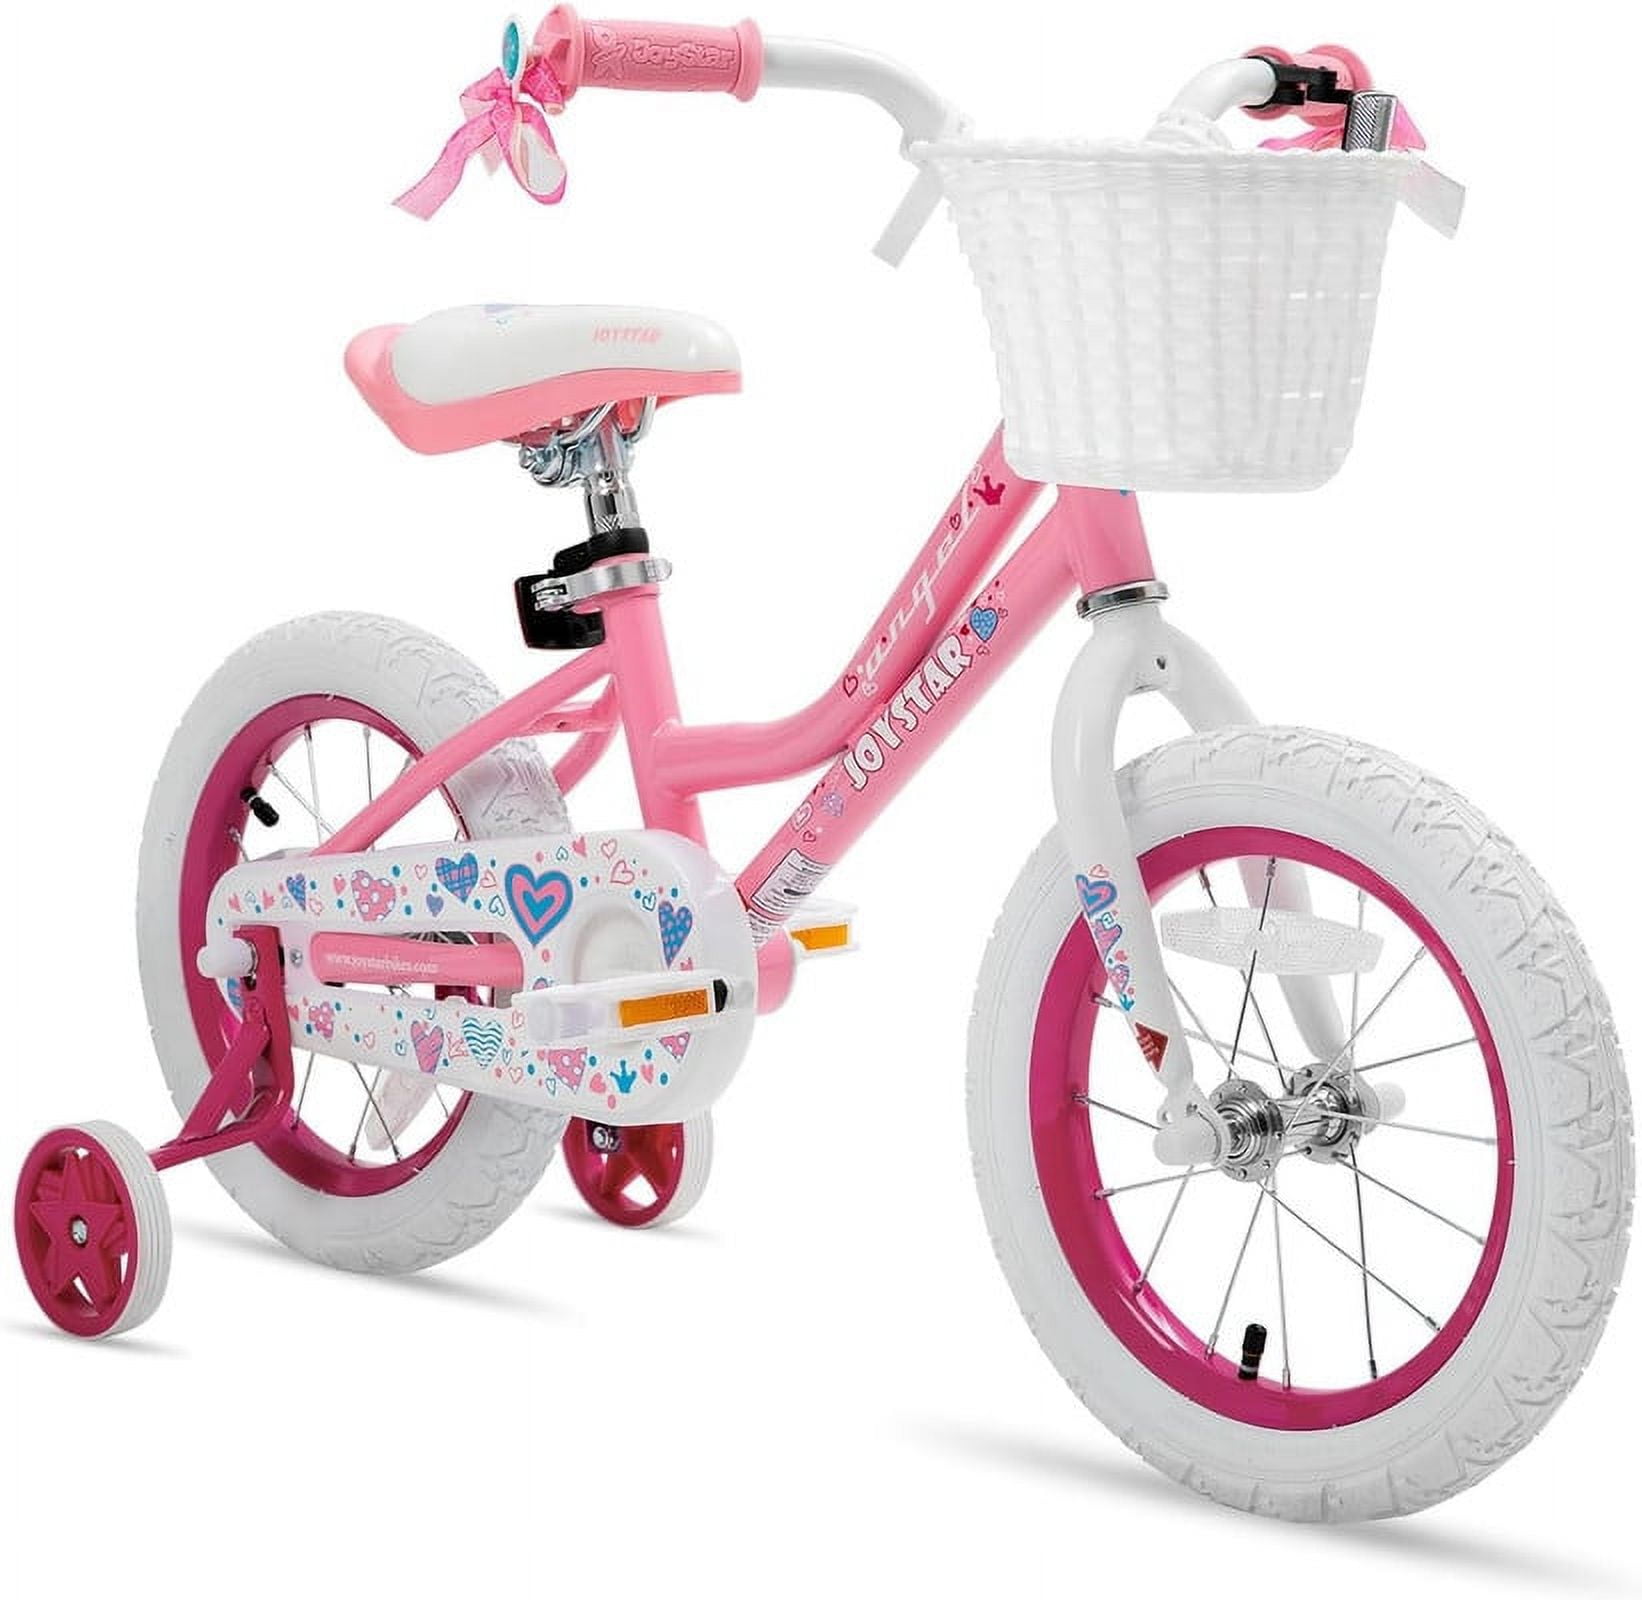 JOYSTAR Petal Girls Bike for Toddlers and Kids Age 2-13 Years, 12